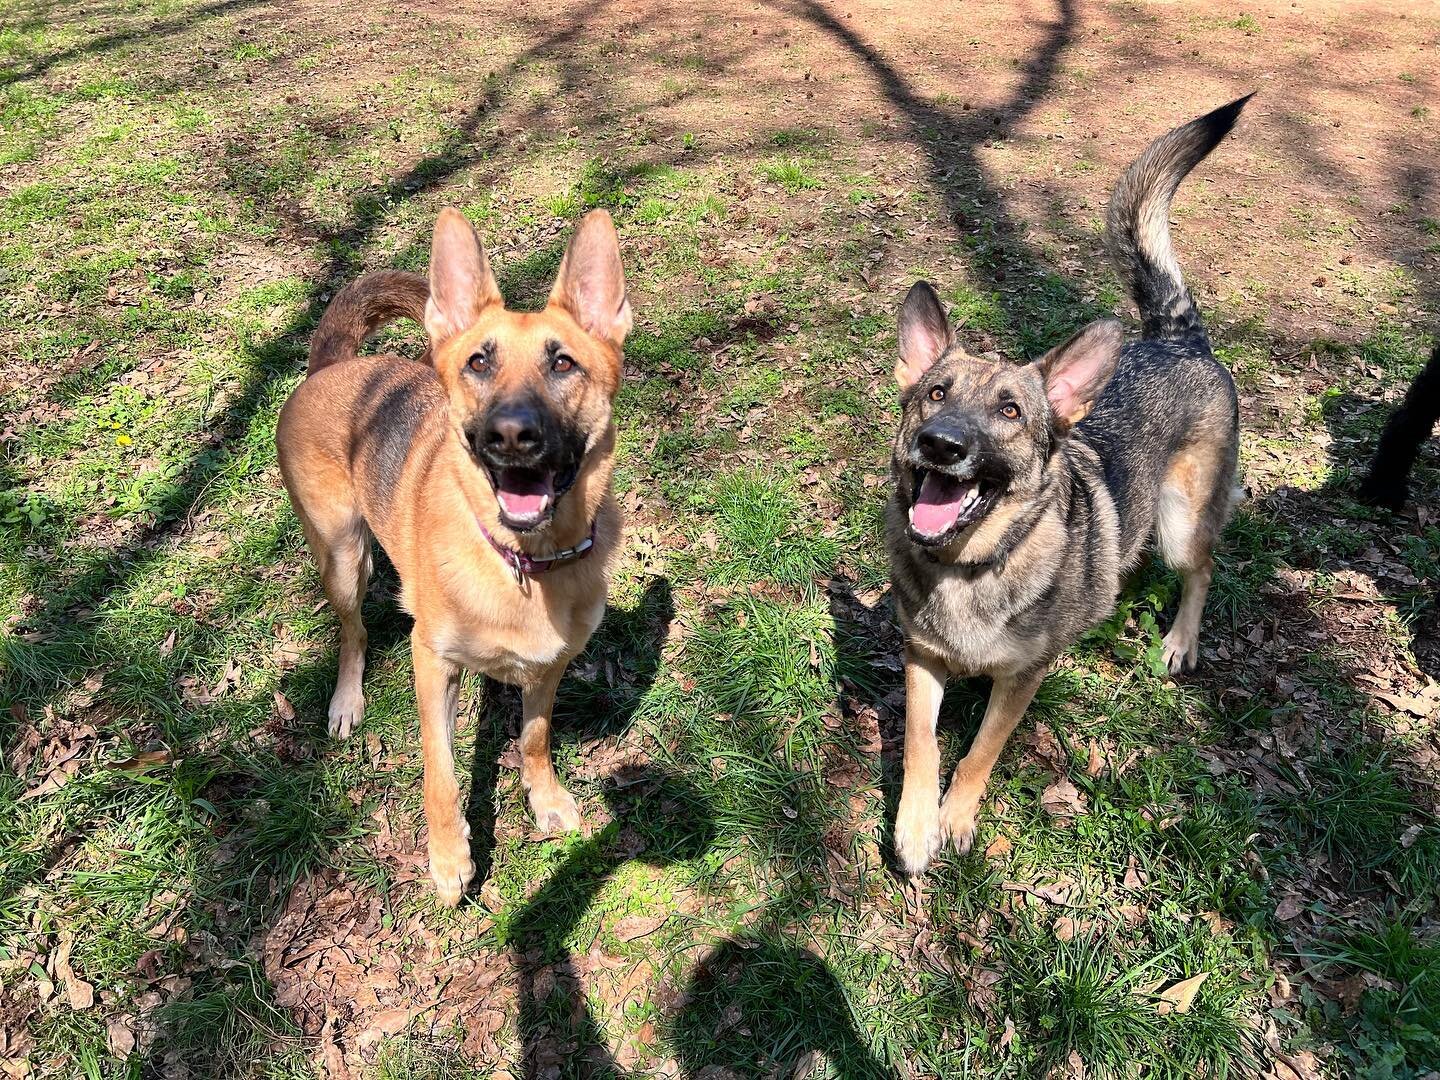 Everybody welcome Riot and Rona! They came to hang out for their own little vacation while their mom was on hers last week. These 2 are super playful and there&rsquo;s never a dull moment with both of them around.
&bull;
#OnAJourney #dogtrainersofatl